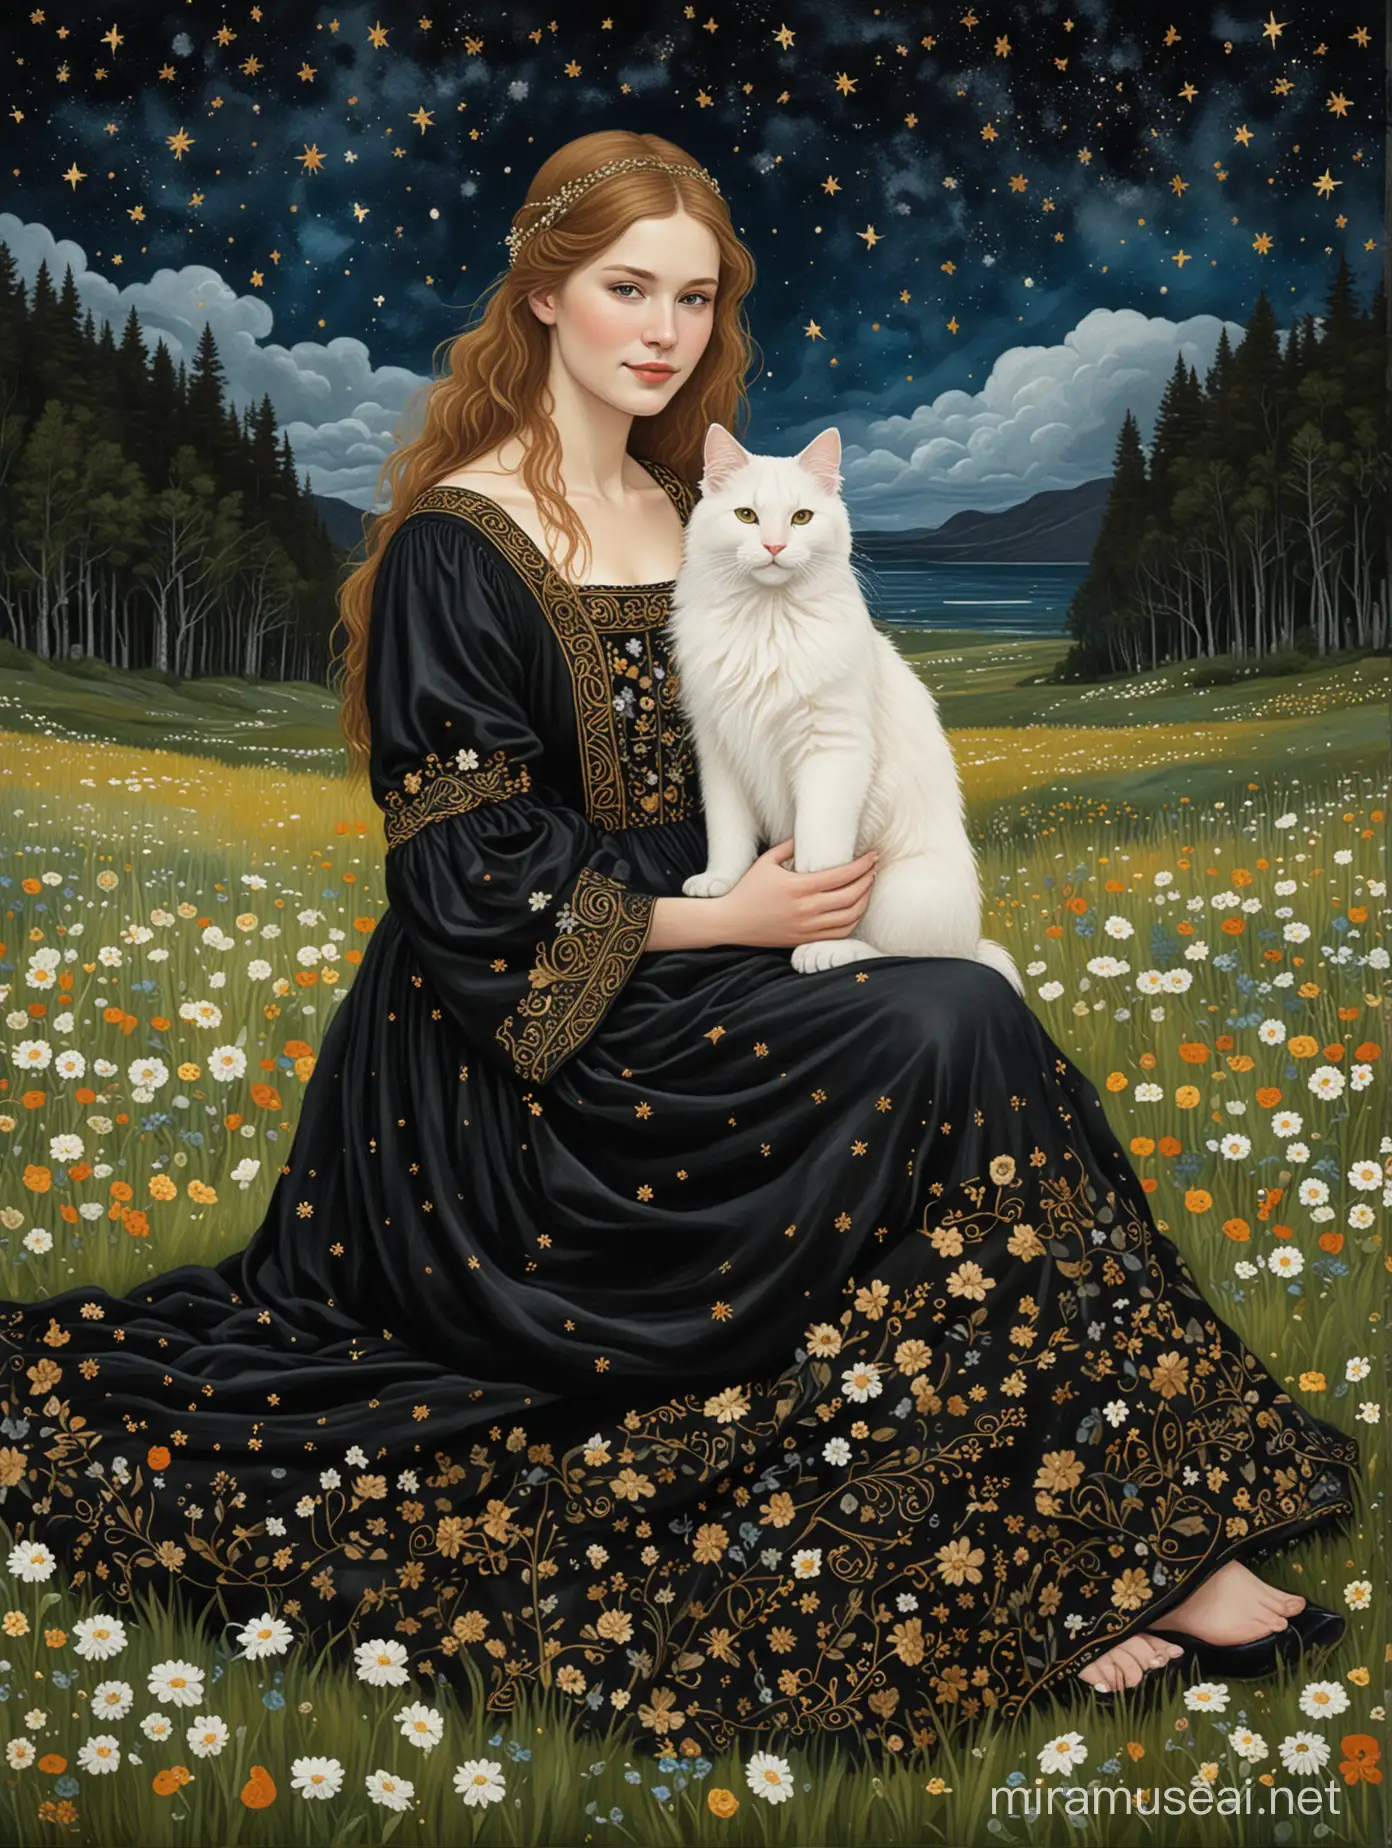 Medieval Kate Bekinsale with Norwegian Forest Cat in Starlit Birch Grove